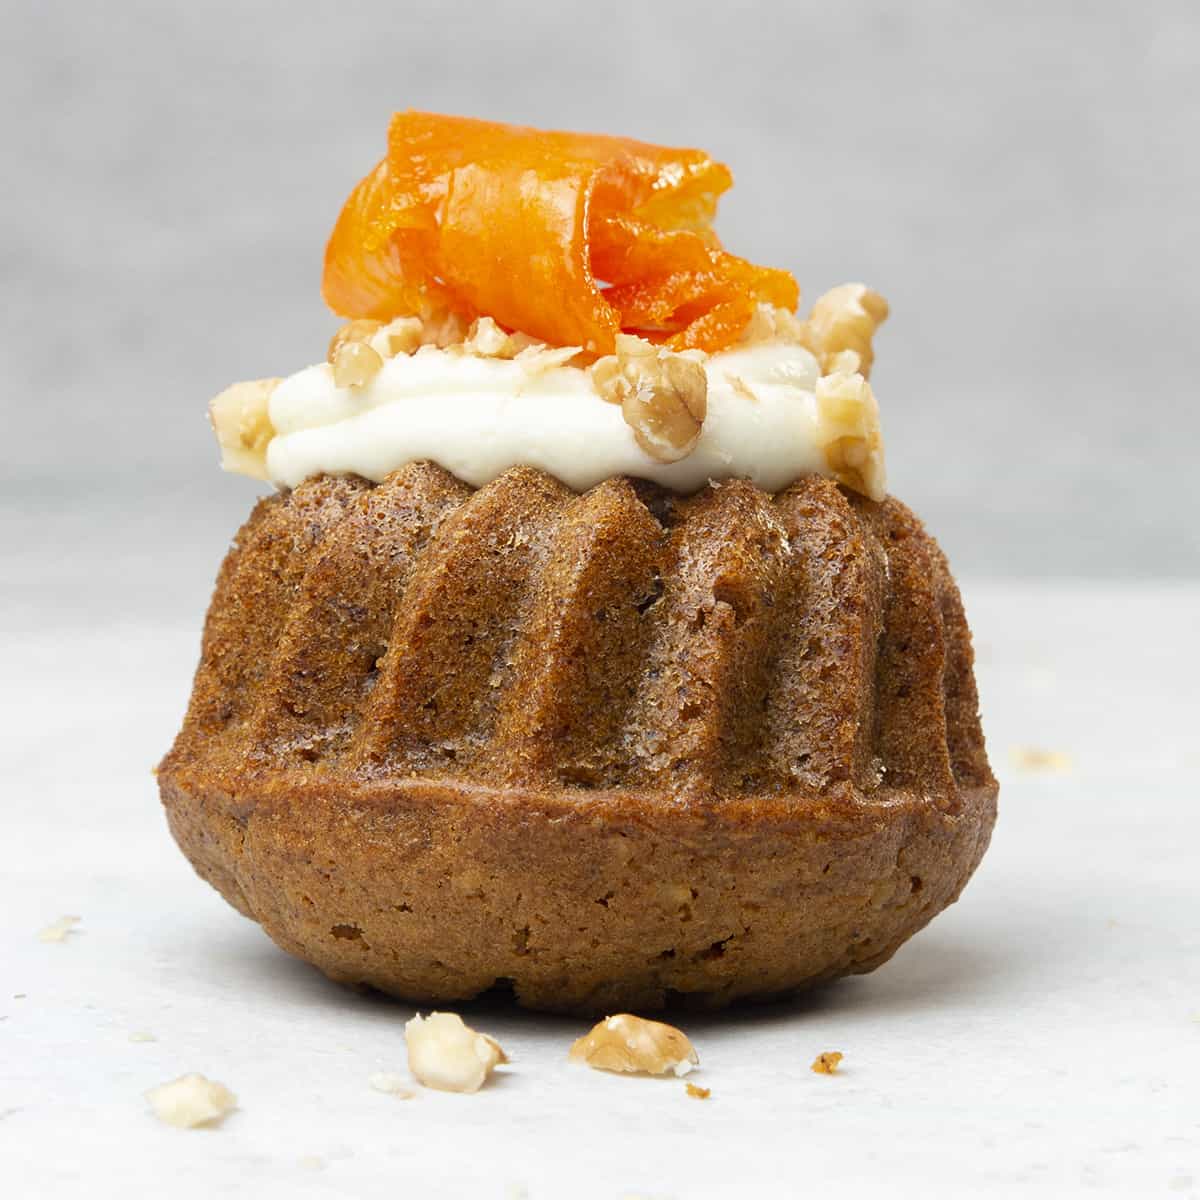 <p>Easy <strong><a href="https://www.spatuladesserts.com/moist-carrot-mini-bundt-cake-recipe/">Mini Carrot Cakes</a></strong> with silky cream cheese frosting are the ultimate Carrot cake experience in a lovely Mini Bundt version! These adorable small carrot cakes have the perfect individual serving sizes and the most amazing soft, melt-in-your-mouth texture with silky cream cheese frosting and a super-easy yet decorative candied carrot finish.</p> <p><strong>Go to the recipe: <a href="https://www.spatuladesserts.com/moist-carrot-mini-bundt-cake-recipe/">Mini Carrot Cakes</a></strong></p>